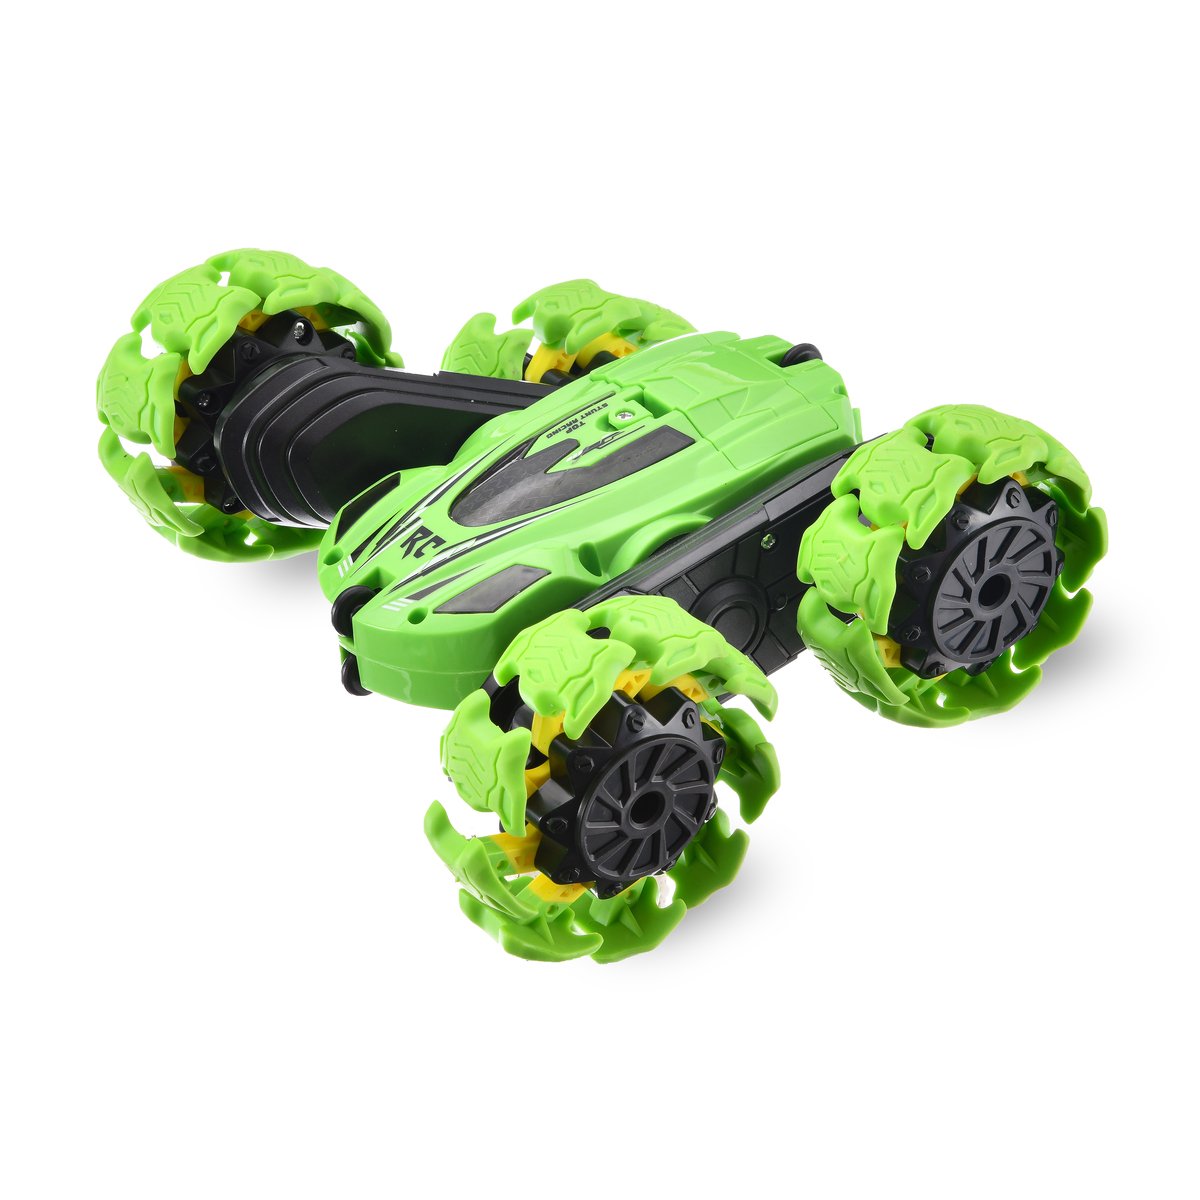 Zunchen Stunt Remote Control Car with Light, Green, 868A